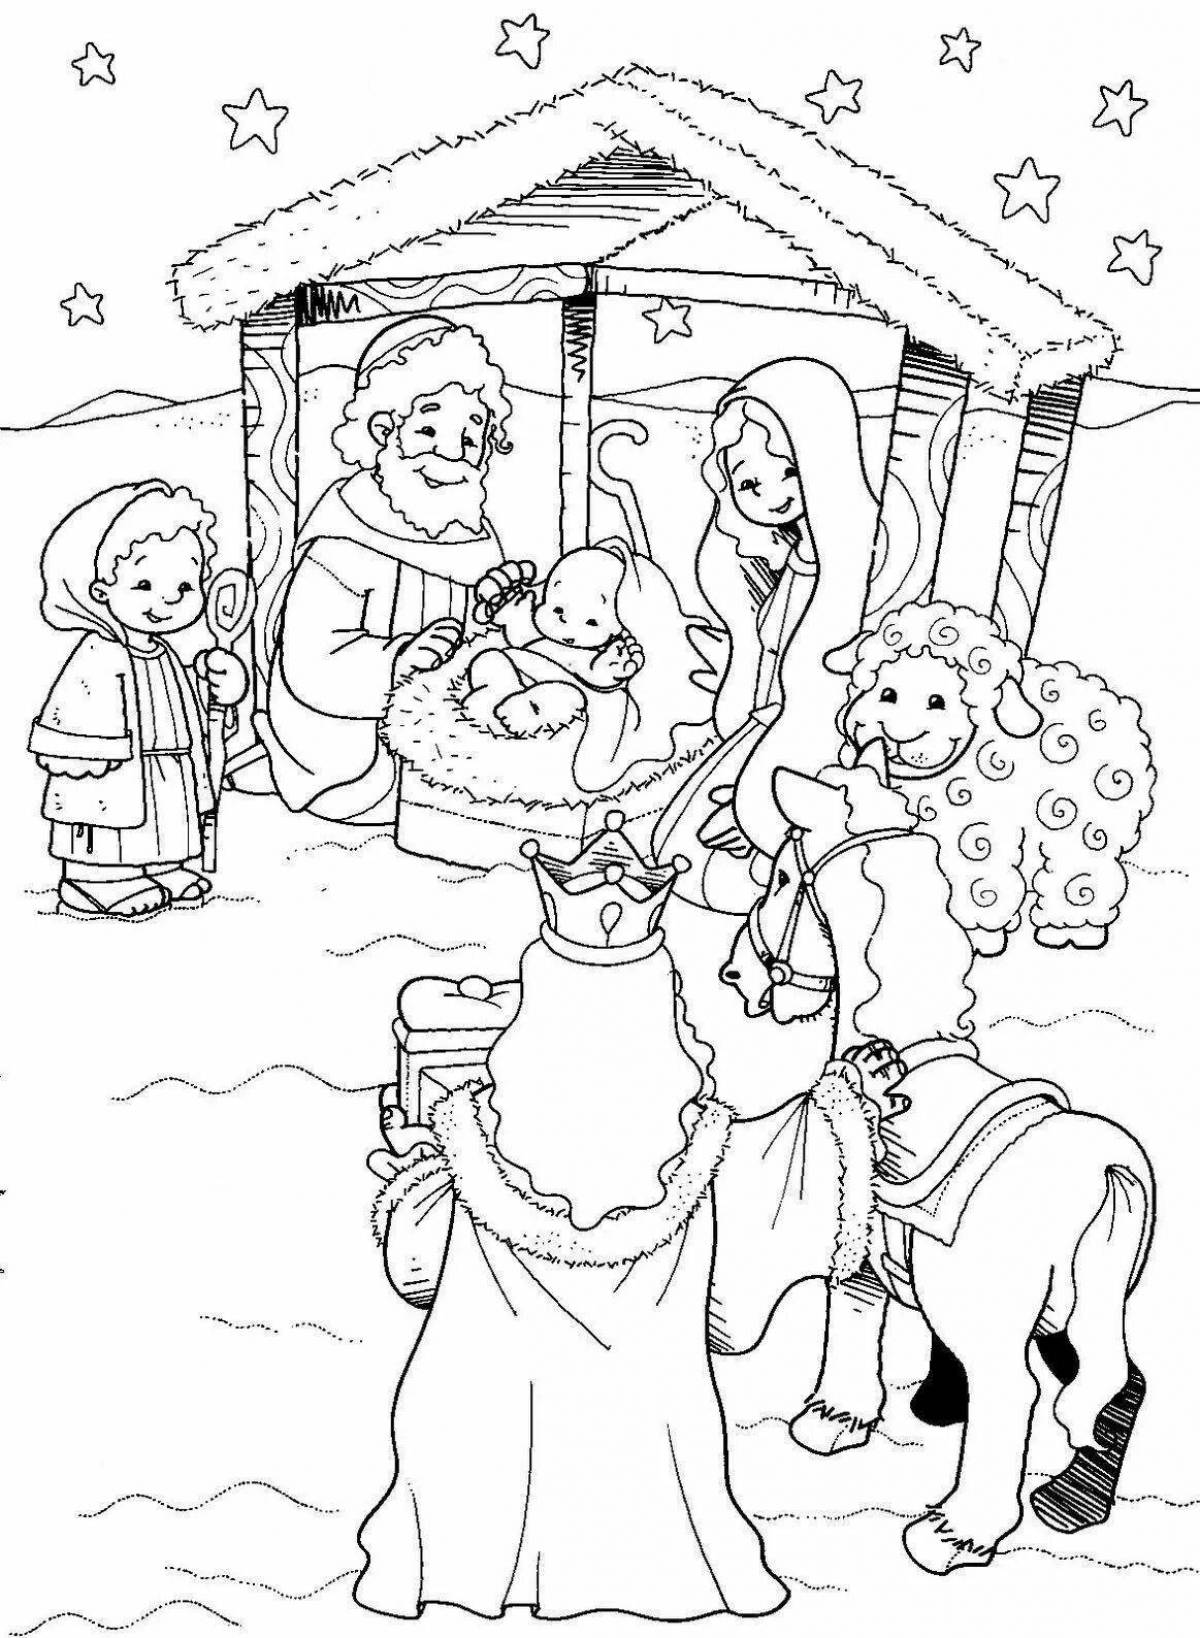 Great Christmas coloring book for kids 4-5 years old